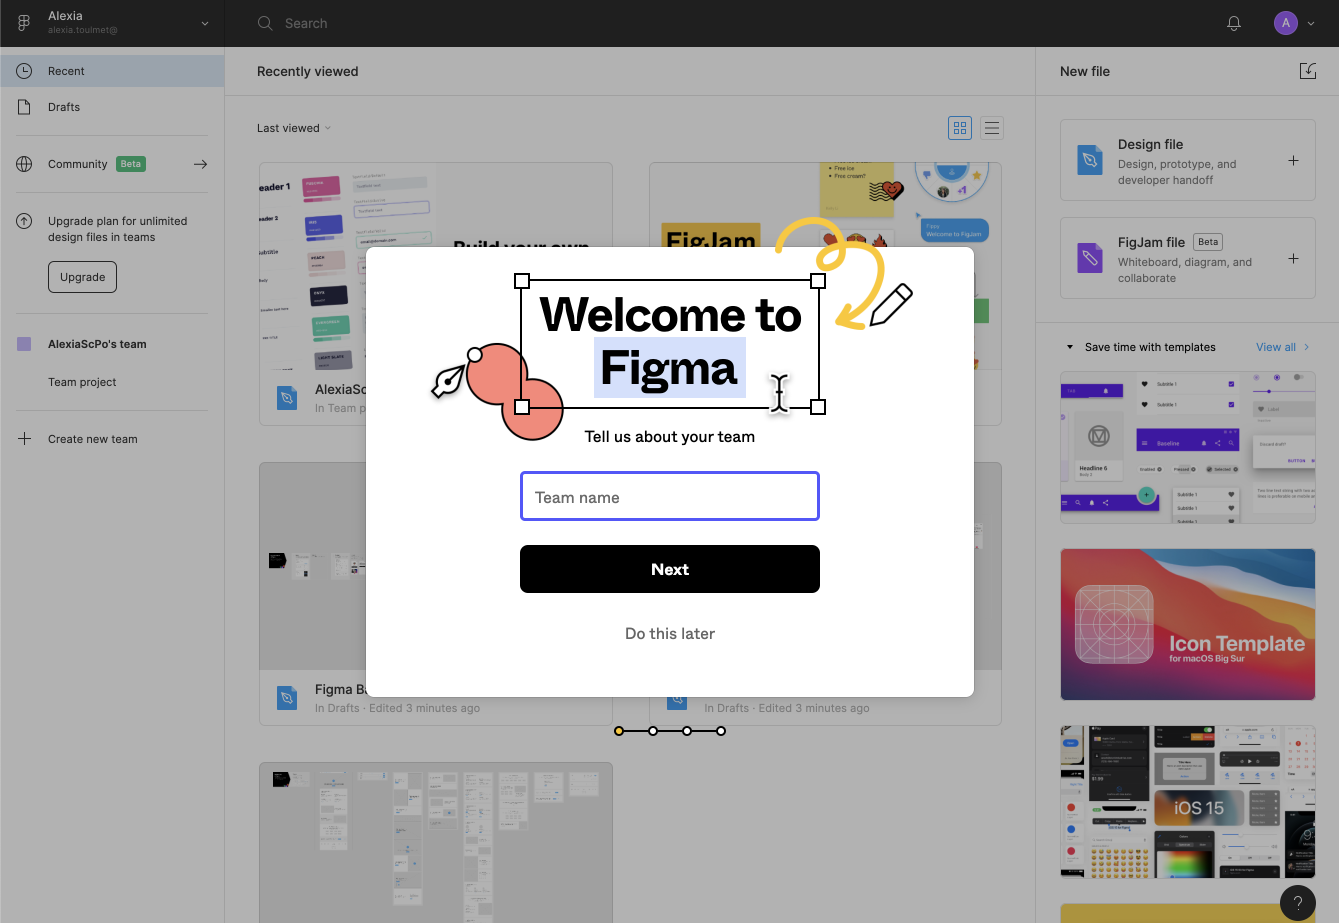 A screenshot of a pop-up window welcoming you to Figma when you log in for the first time.